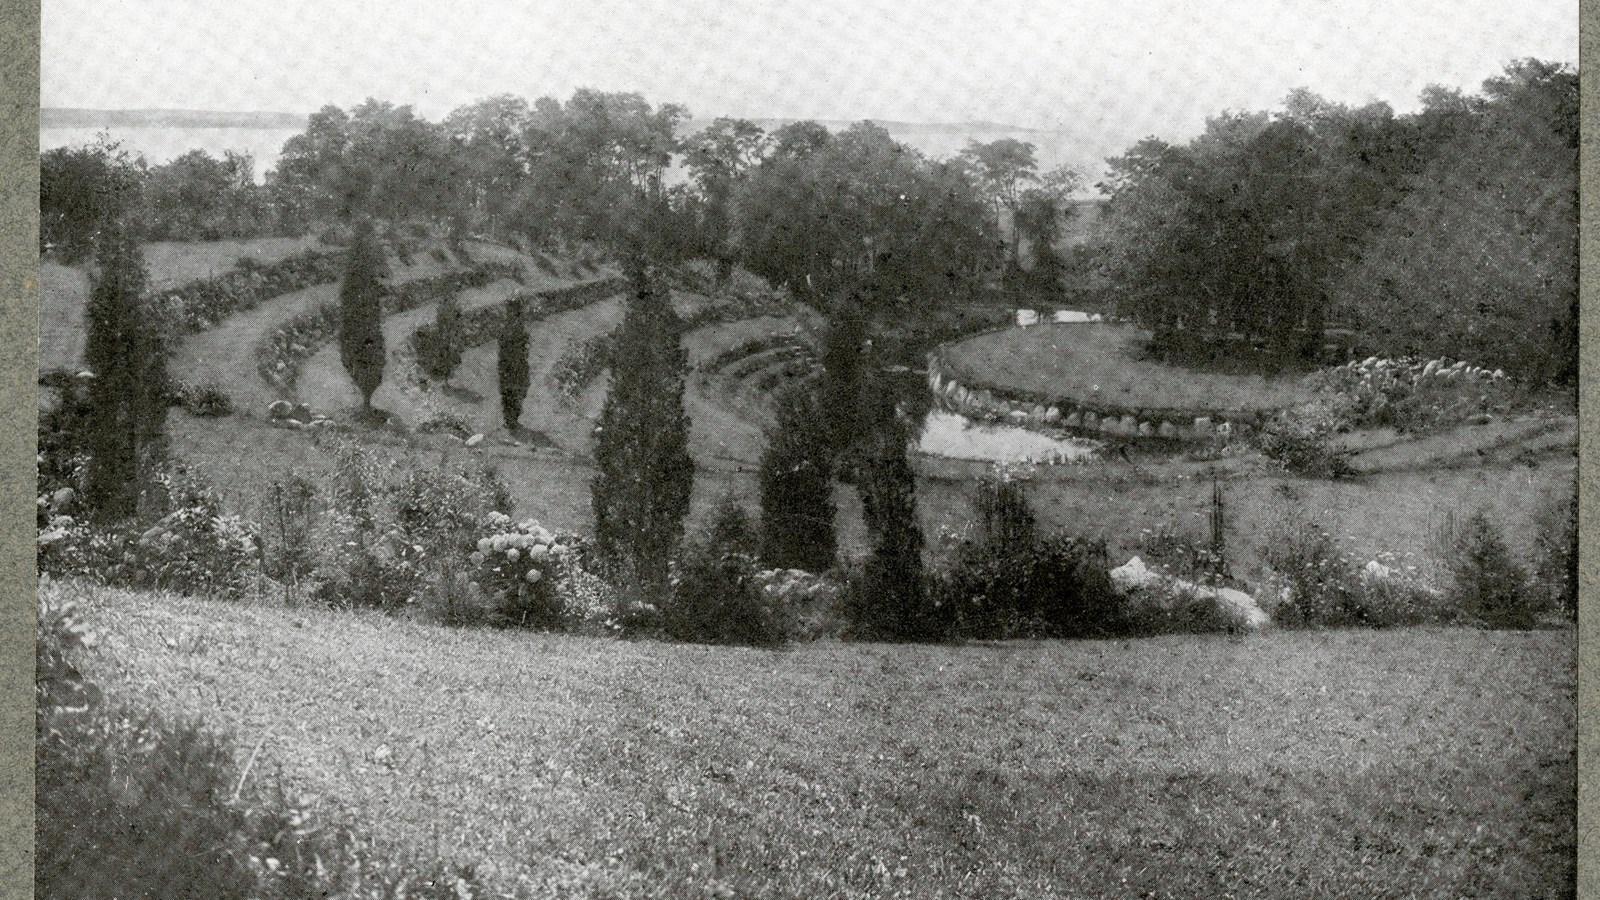 Black and white of hill with stone terraces facing a stage made of grass and rocks. Trees spread out